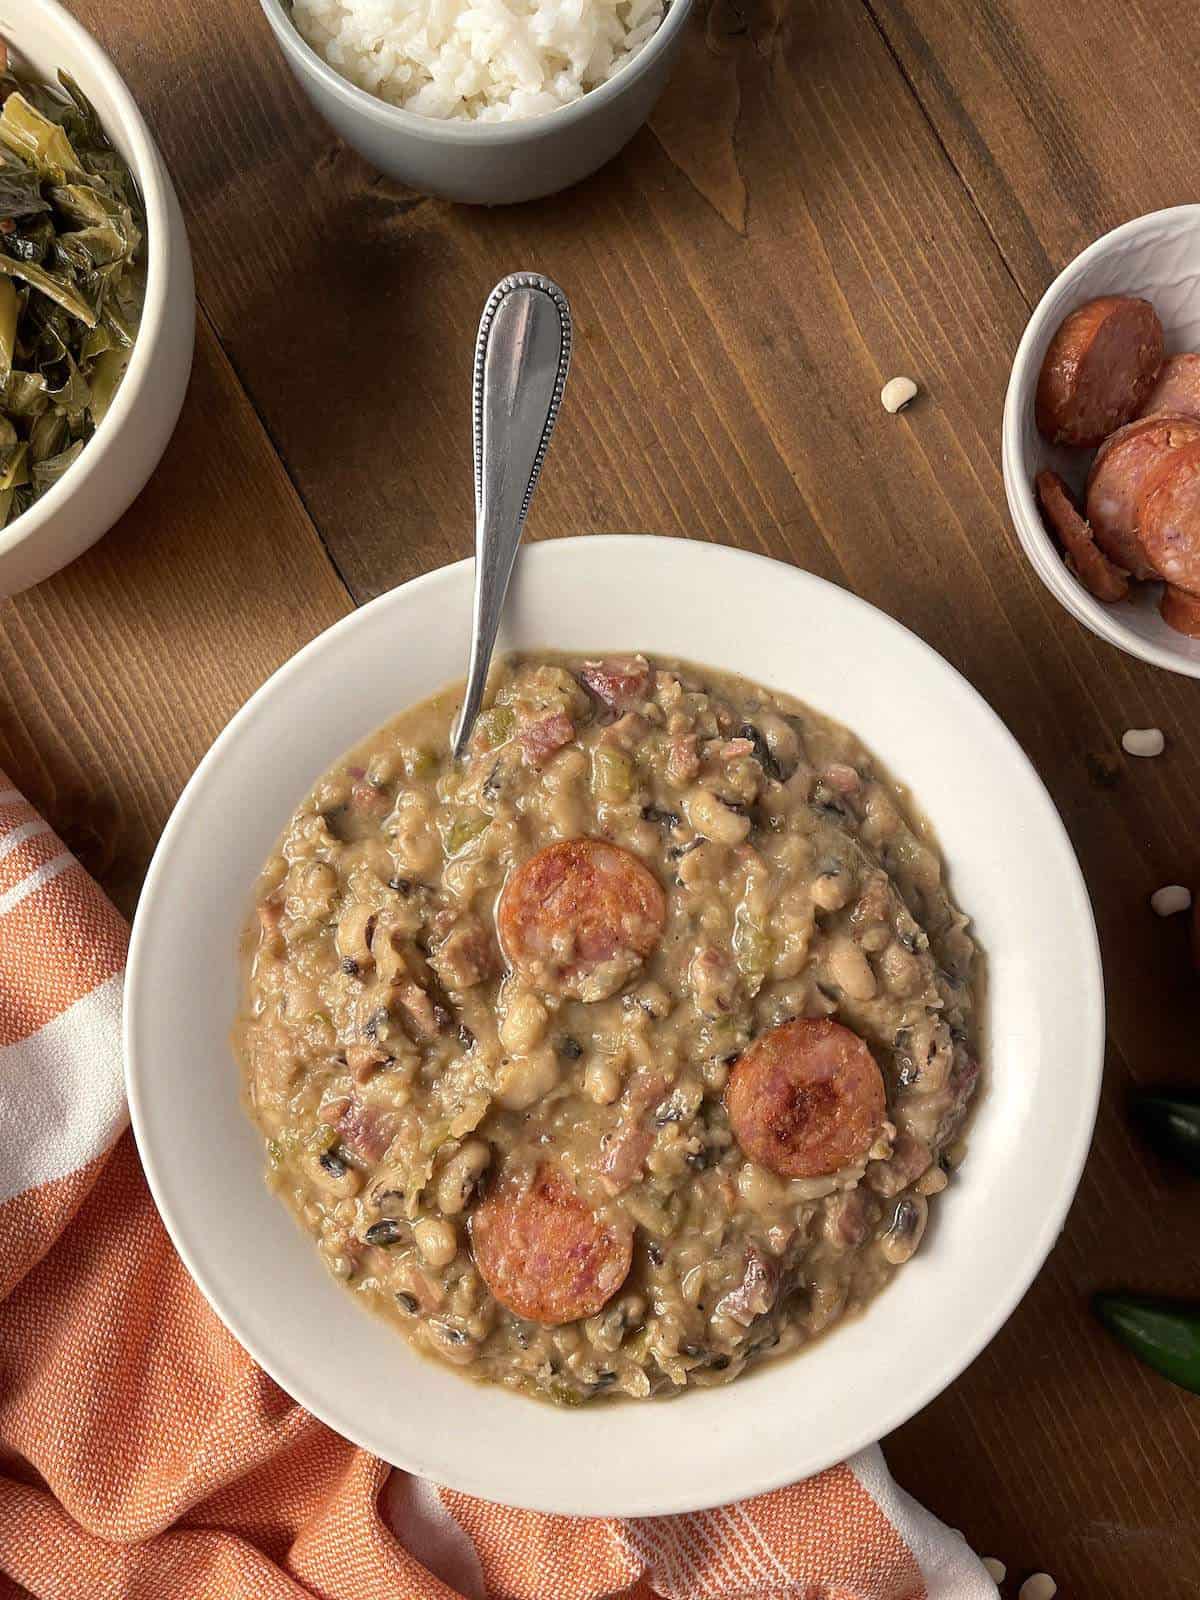 A large white bowl of hoppin' john black eyed peas with a small bowl of sausage, a bowl of rice, and some collard greens.